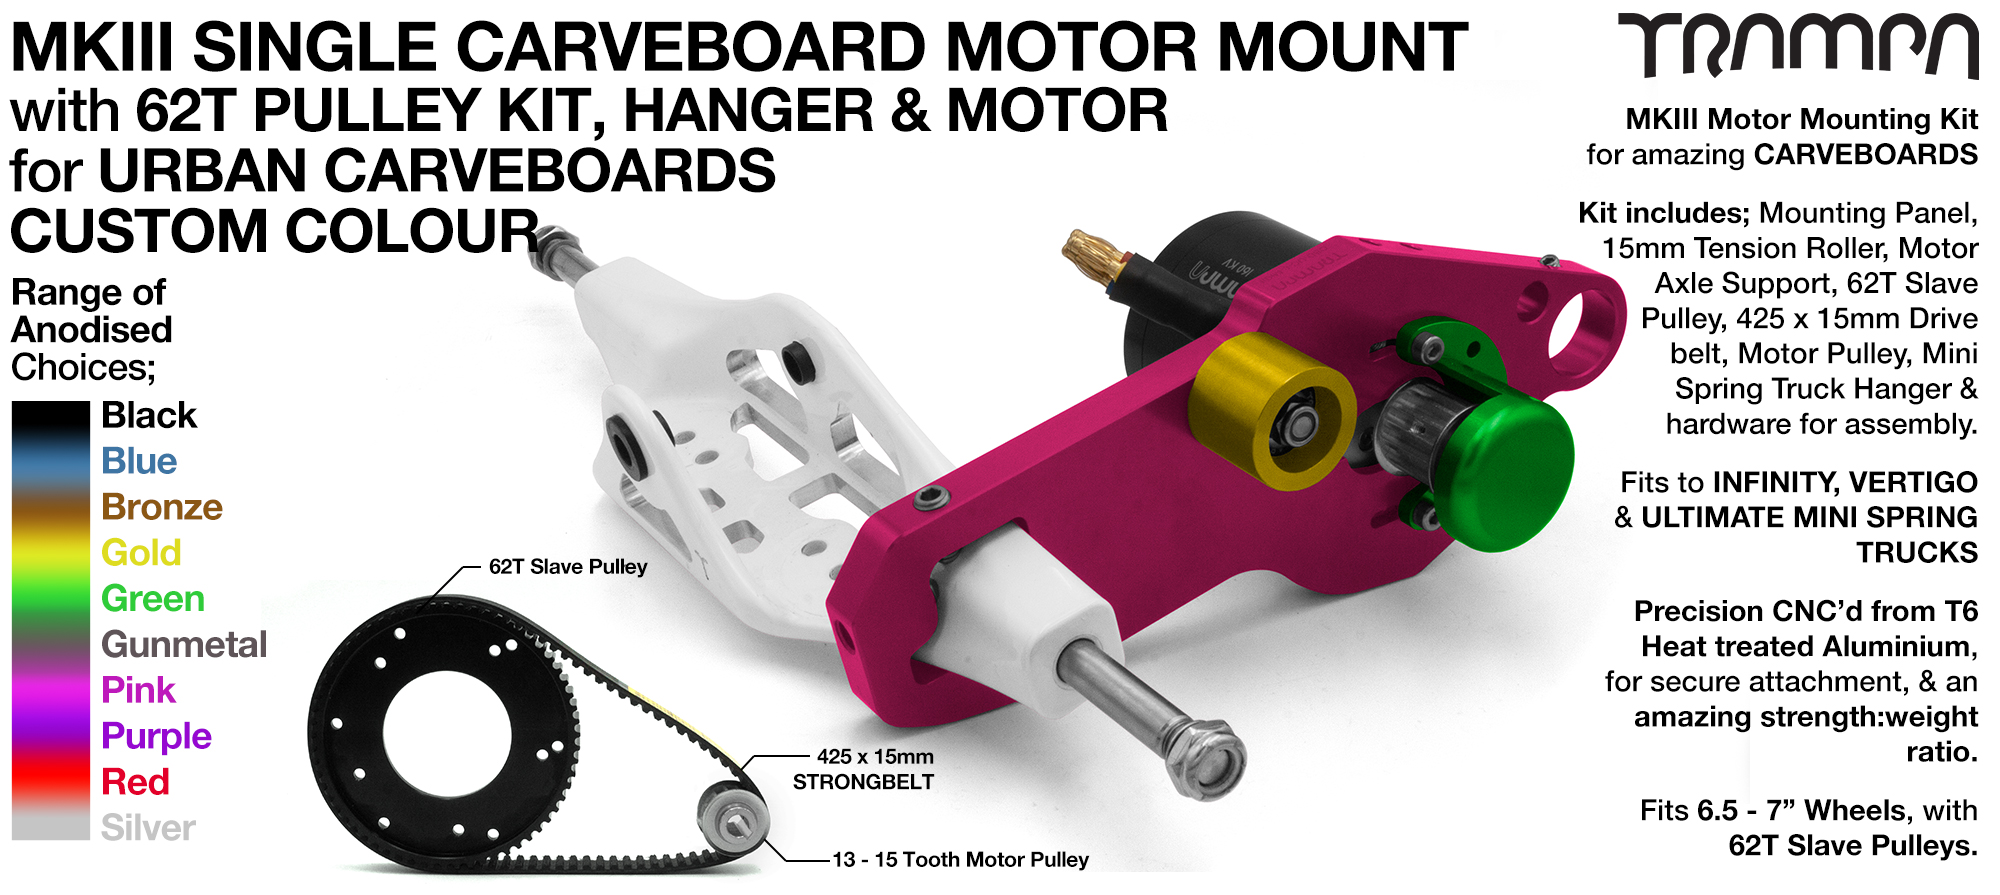 MkIII URBAN CARVEBOARD Motormount on a Mini HANGER with 62 Tooth Pulley Kit & Motor - SINGLE